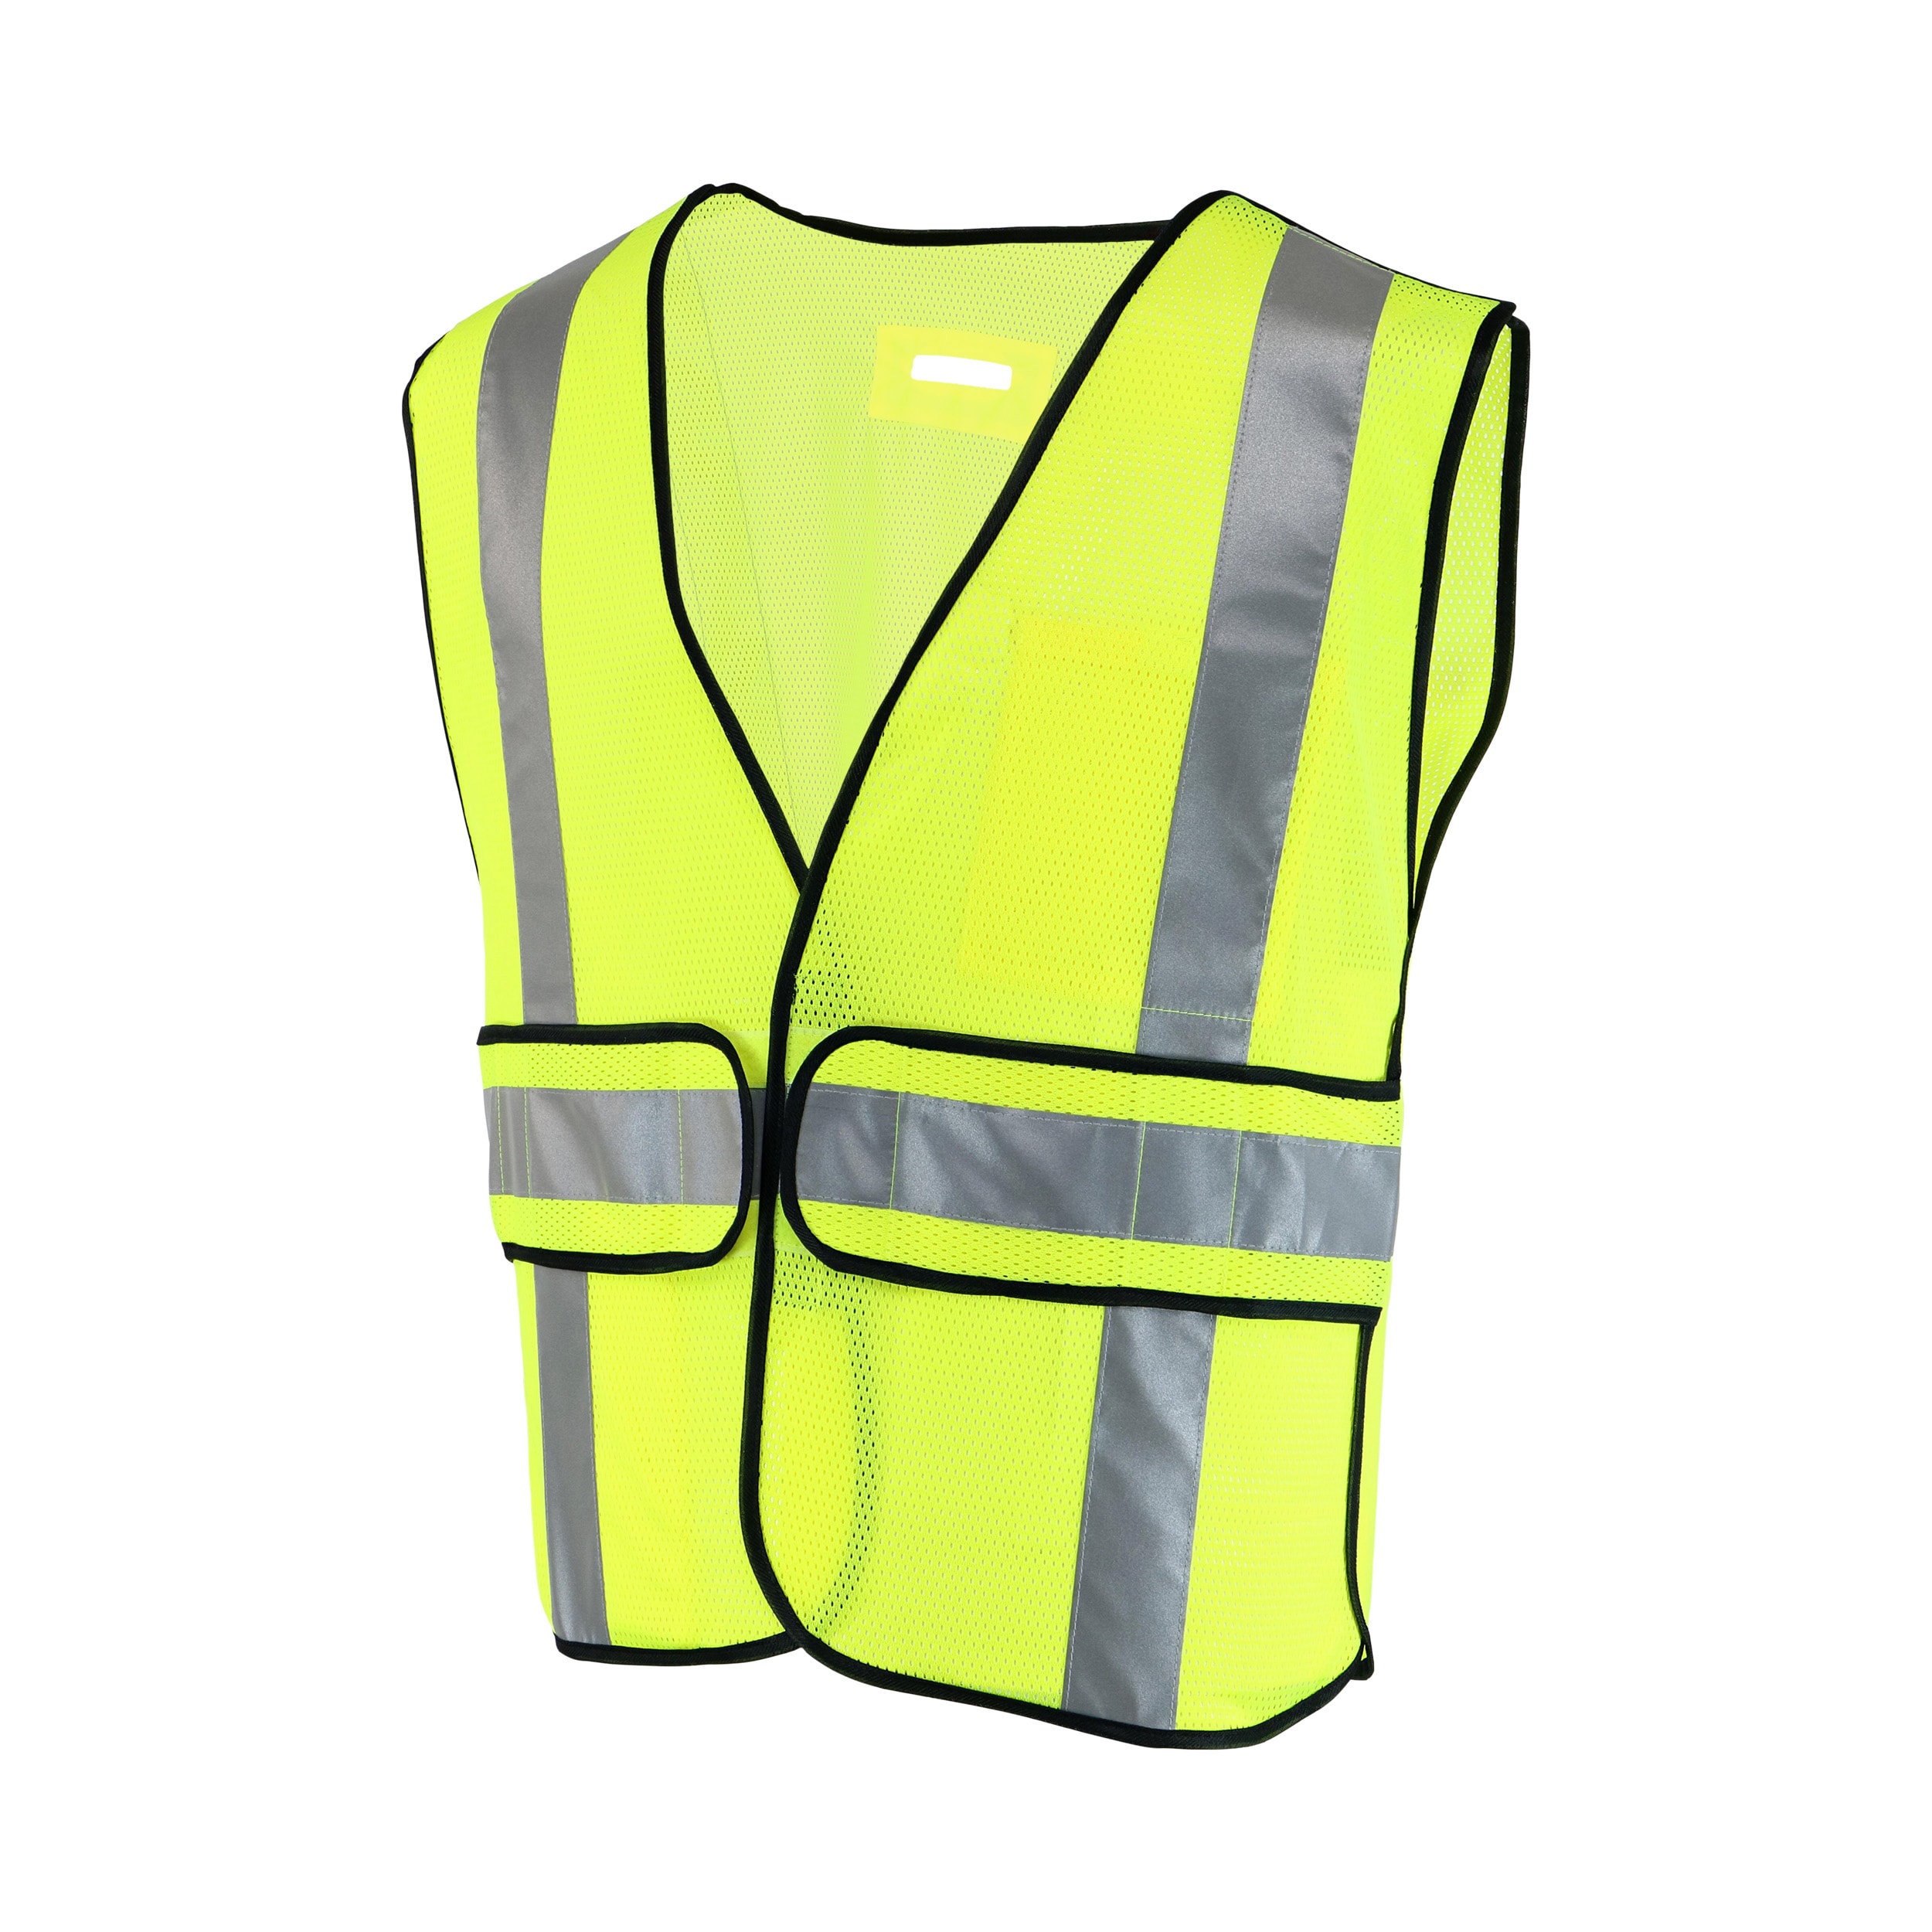 Safety Works Yellow Polyester High Visibility (Ansi Compliant